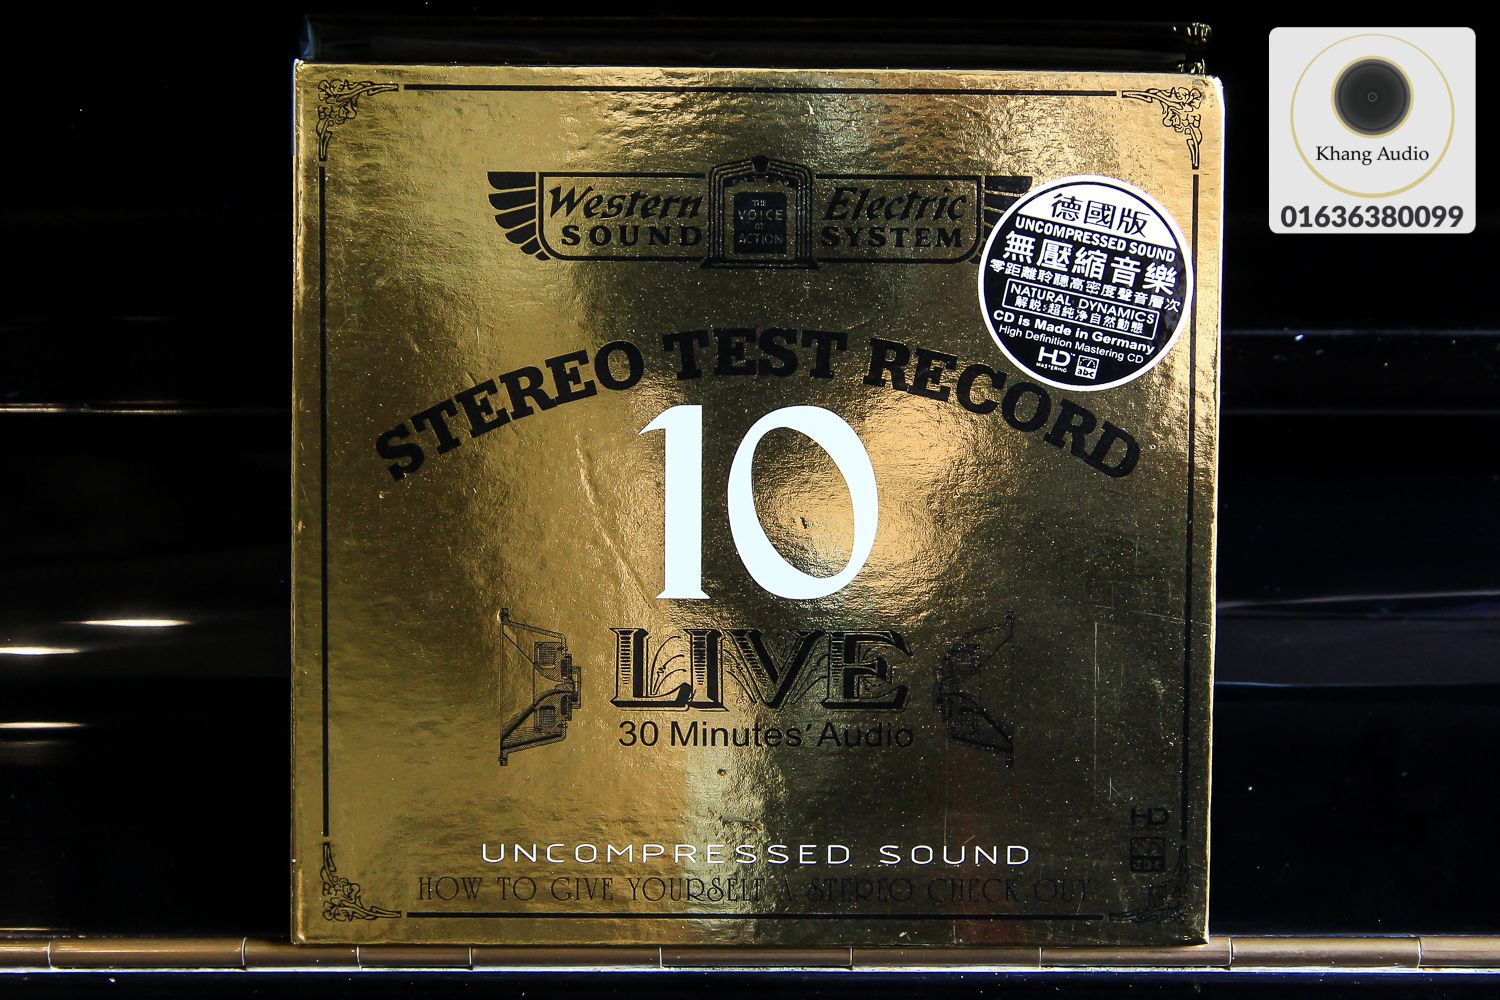 Stereo Test Record 10 Live 30 Minutes Audio HQ Khang Audio 0336380099